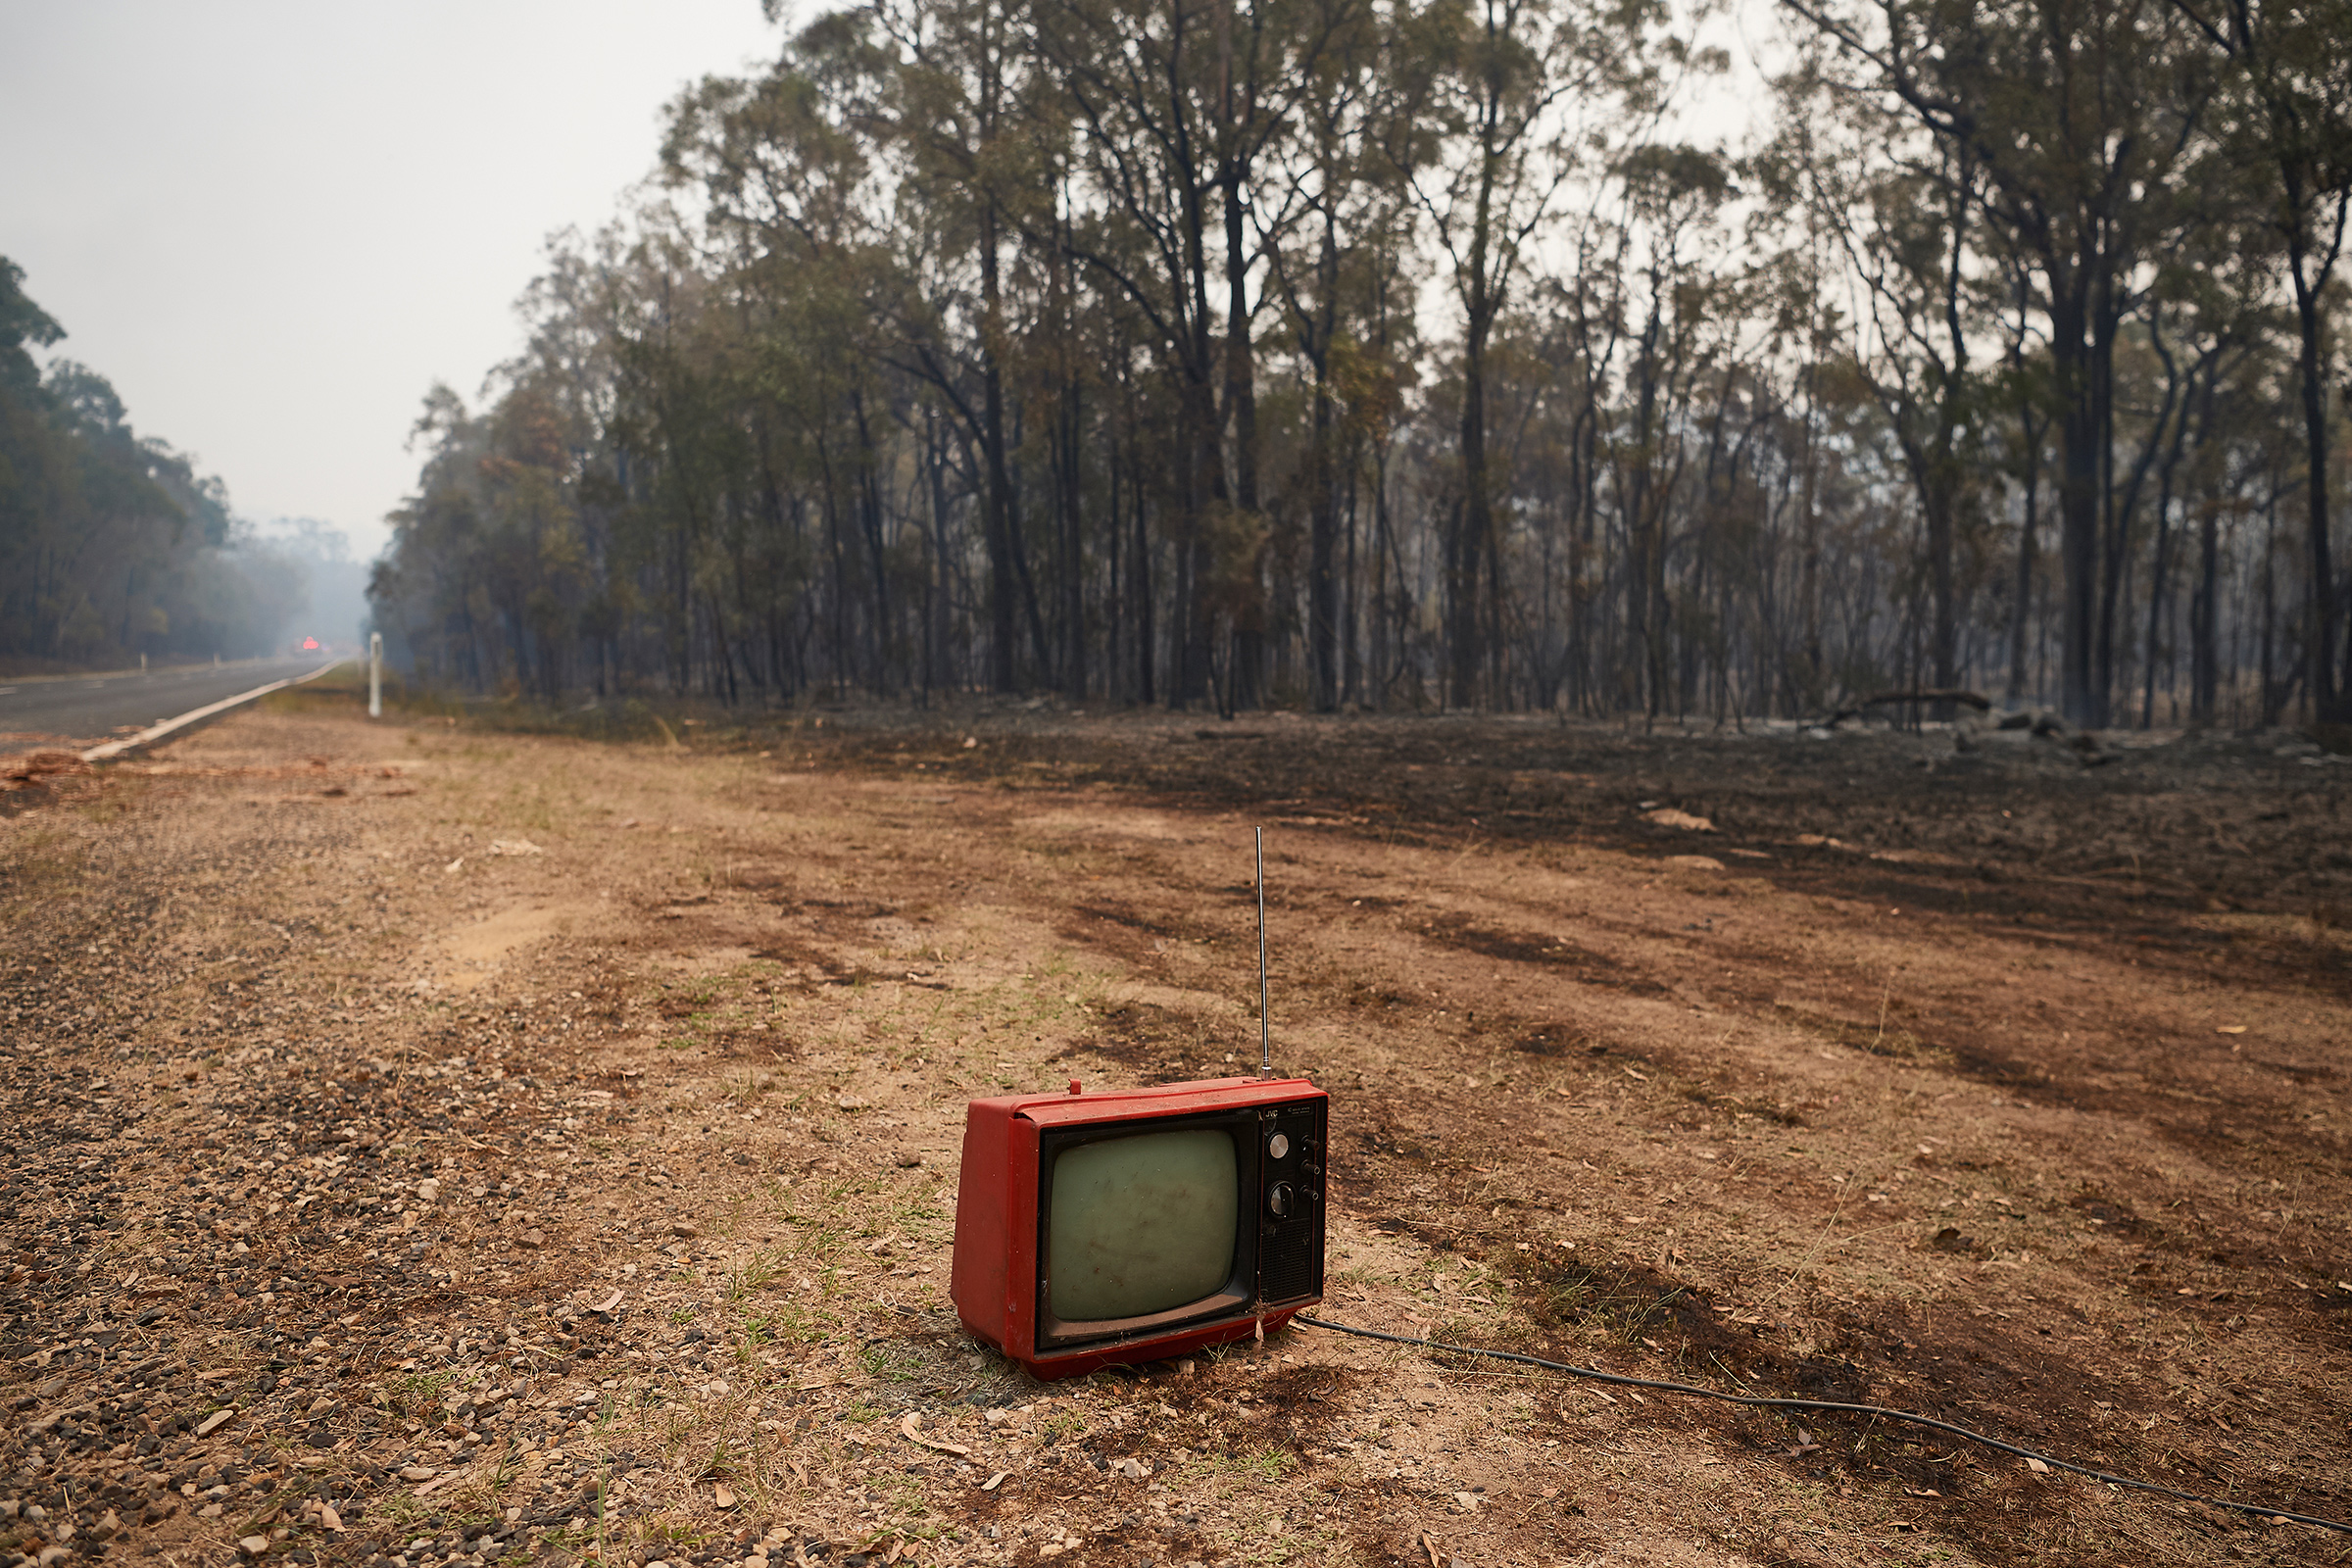 A dumped vintage TV remains intact along Putty Road after devastating fires tore through areas near Colo Heights on Nov. 14, 2019. (Brett Hemmings—Getty Images)